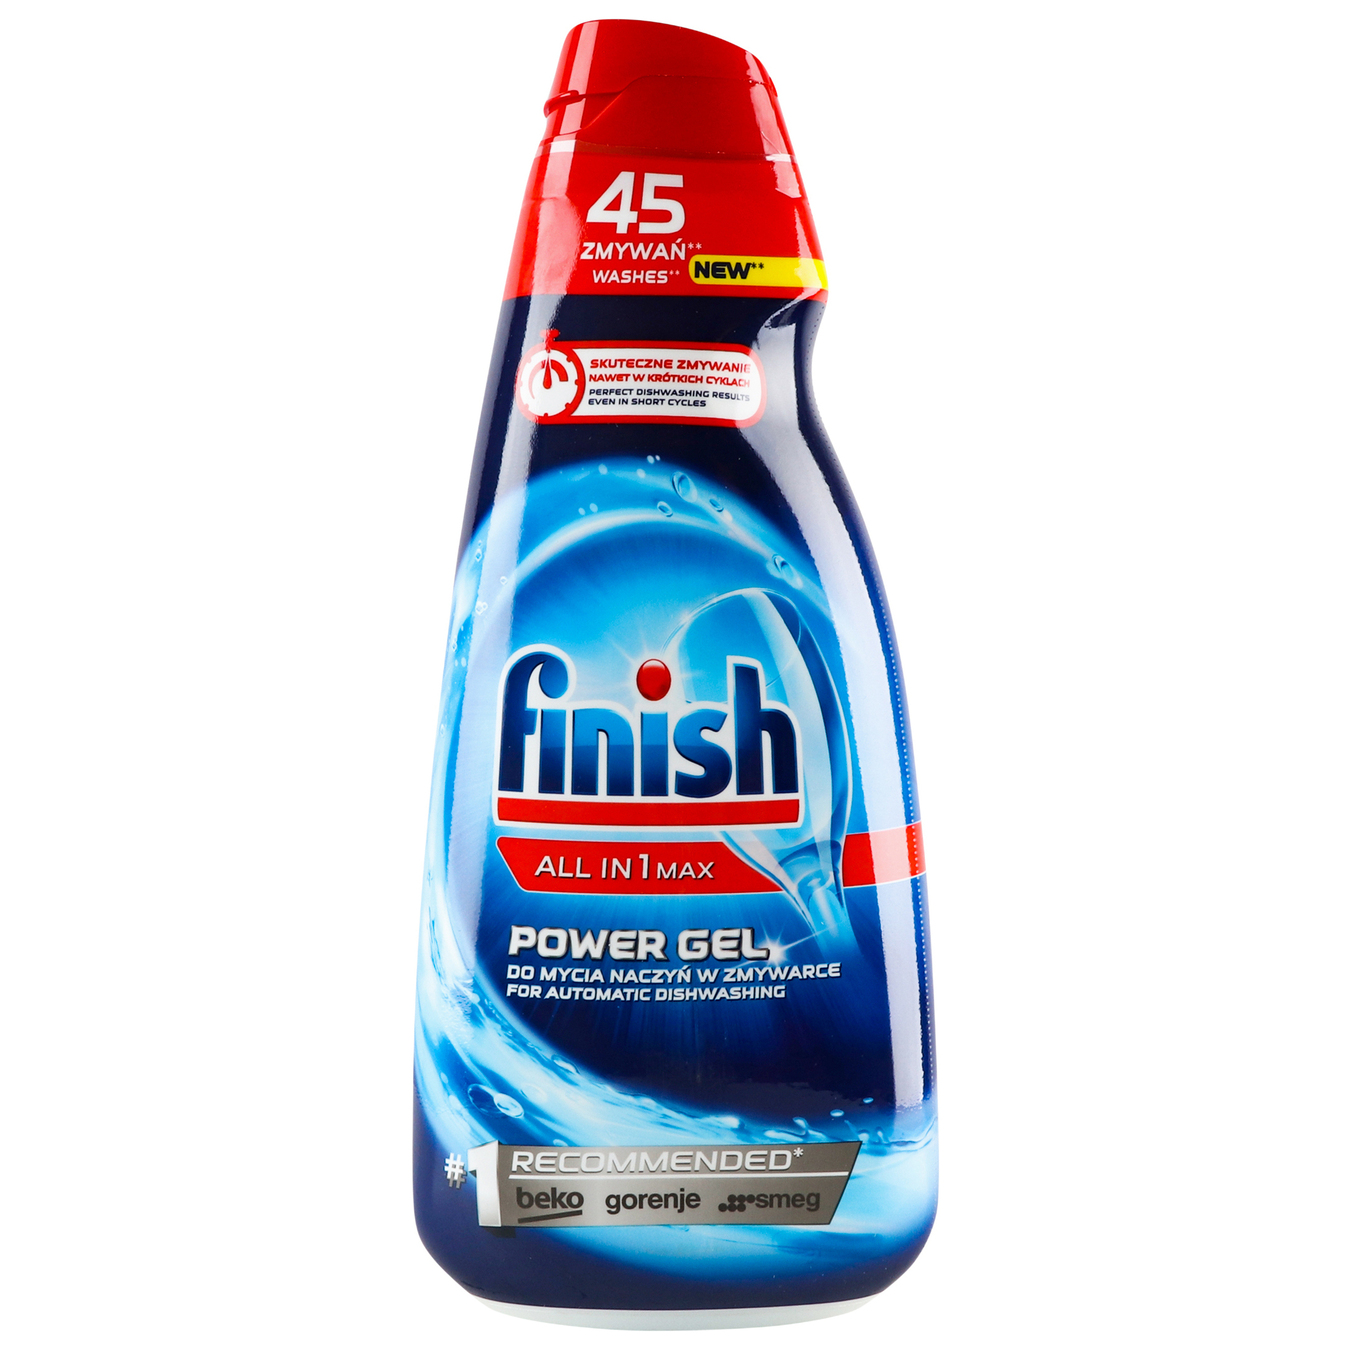 Gel for washing dishes Finish Power All in 1 in dishwashers 900 ml